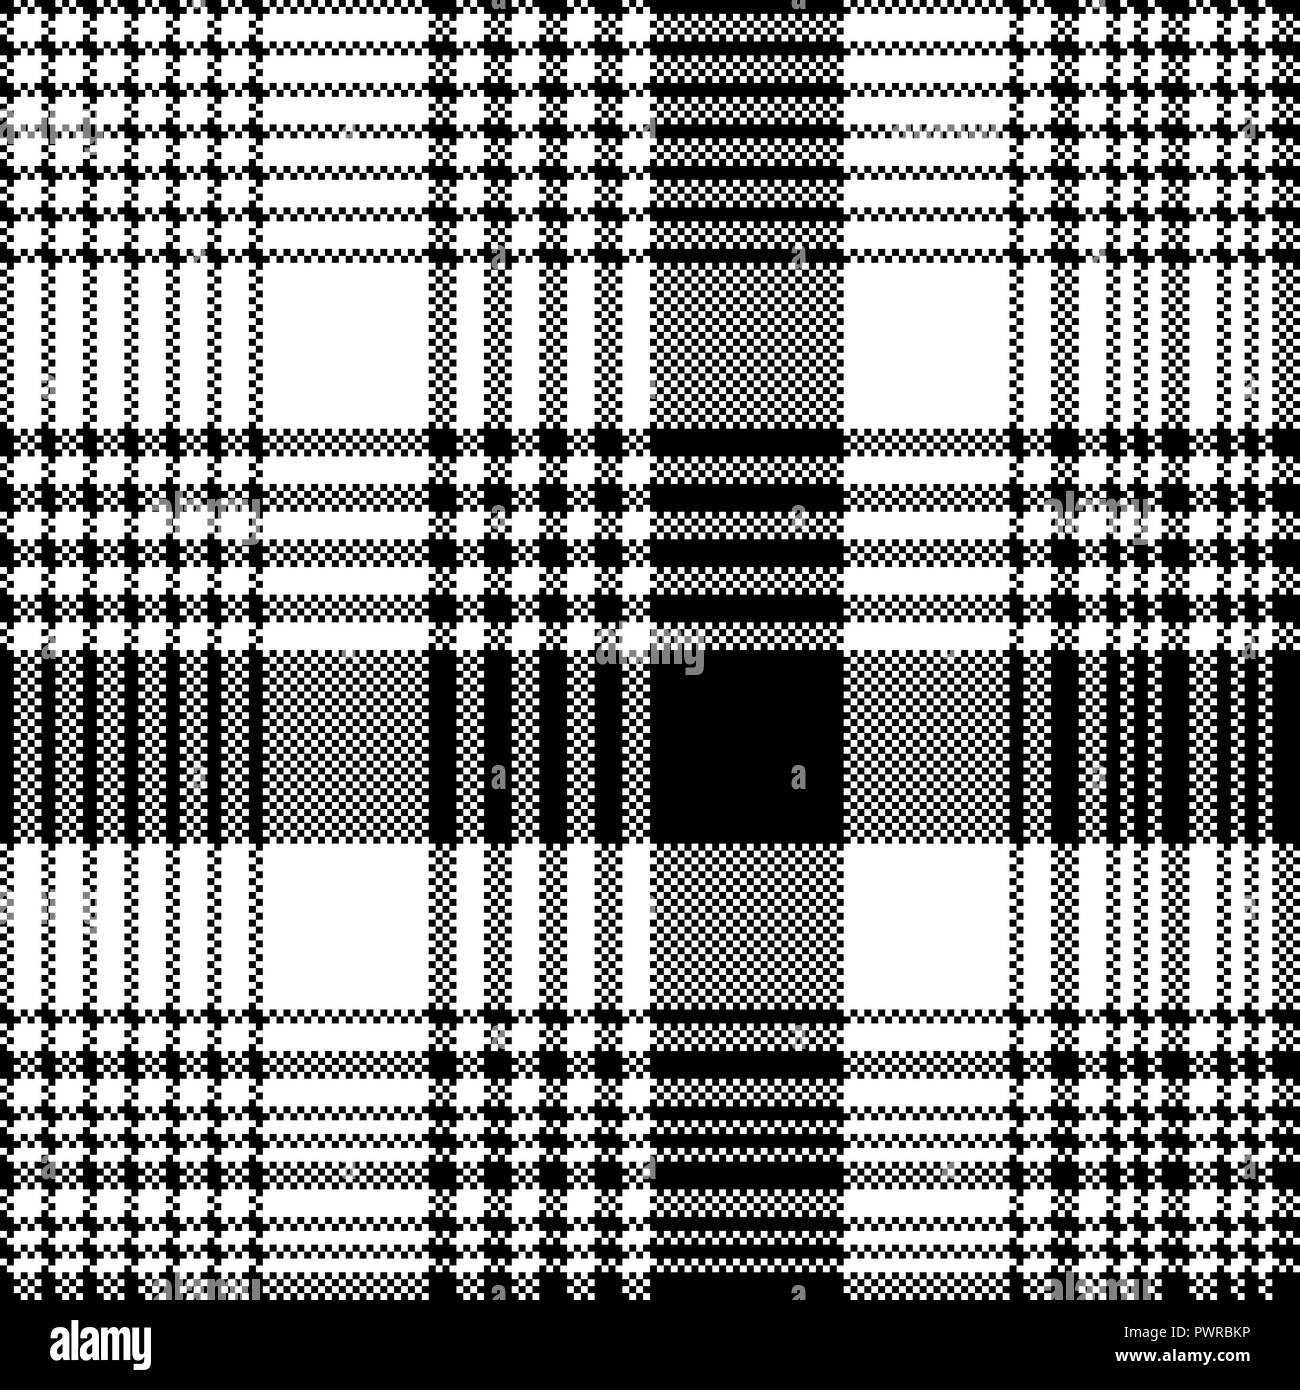 Black and white fabric texture check tartan seamless pattern. Vector ...